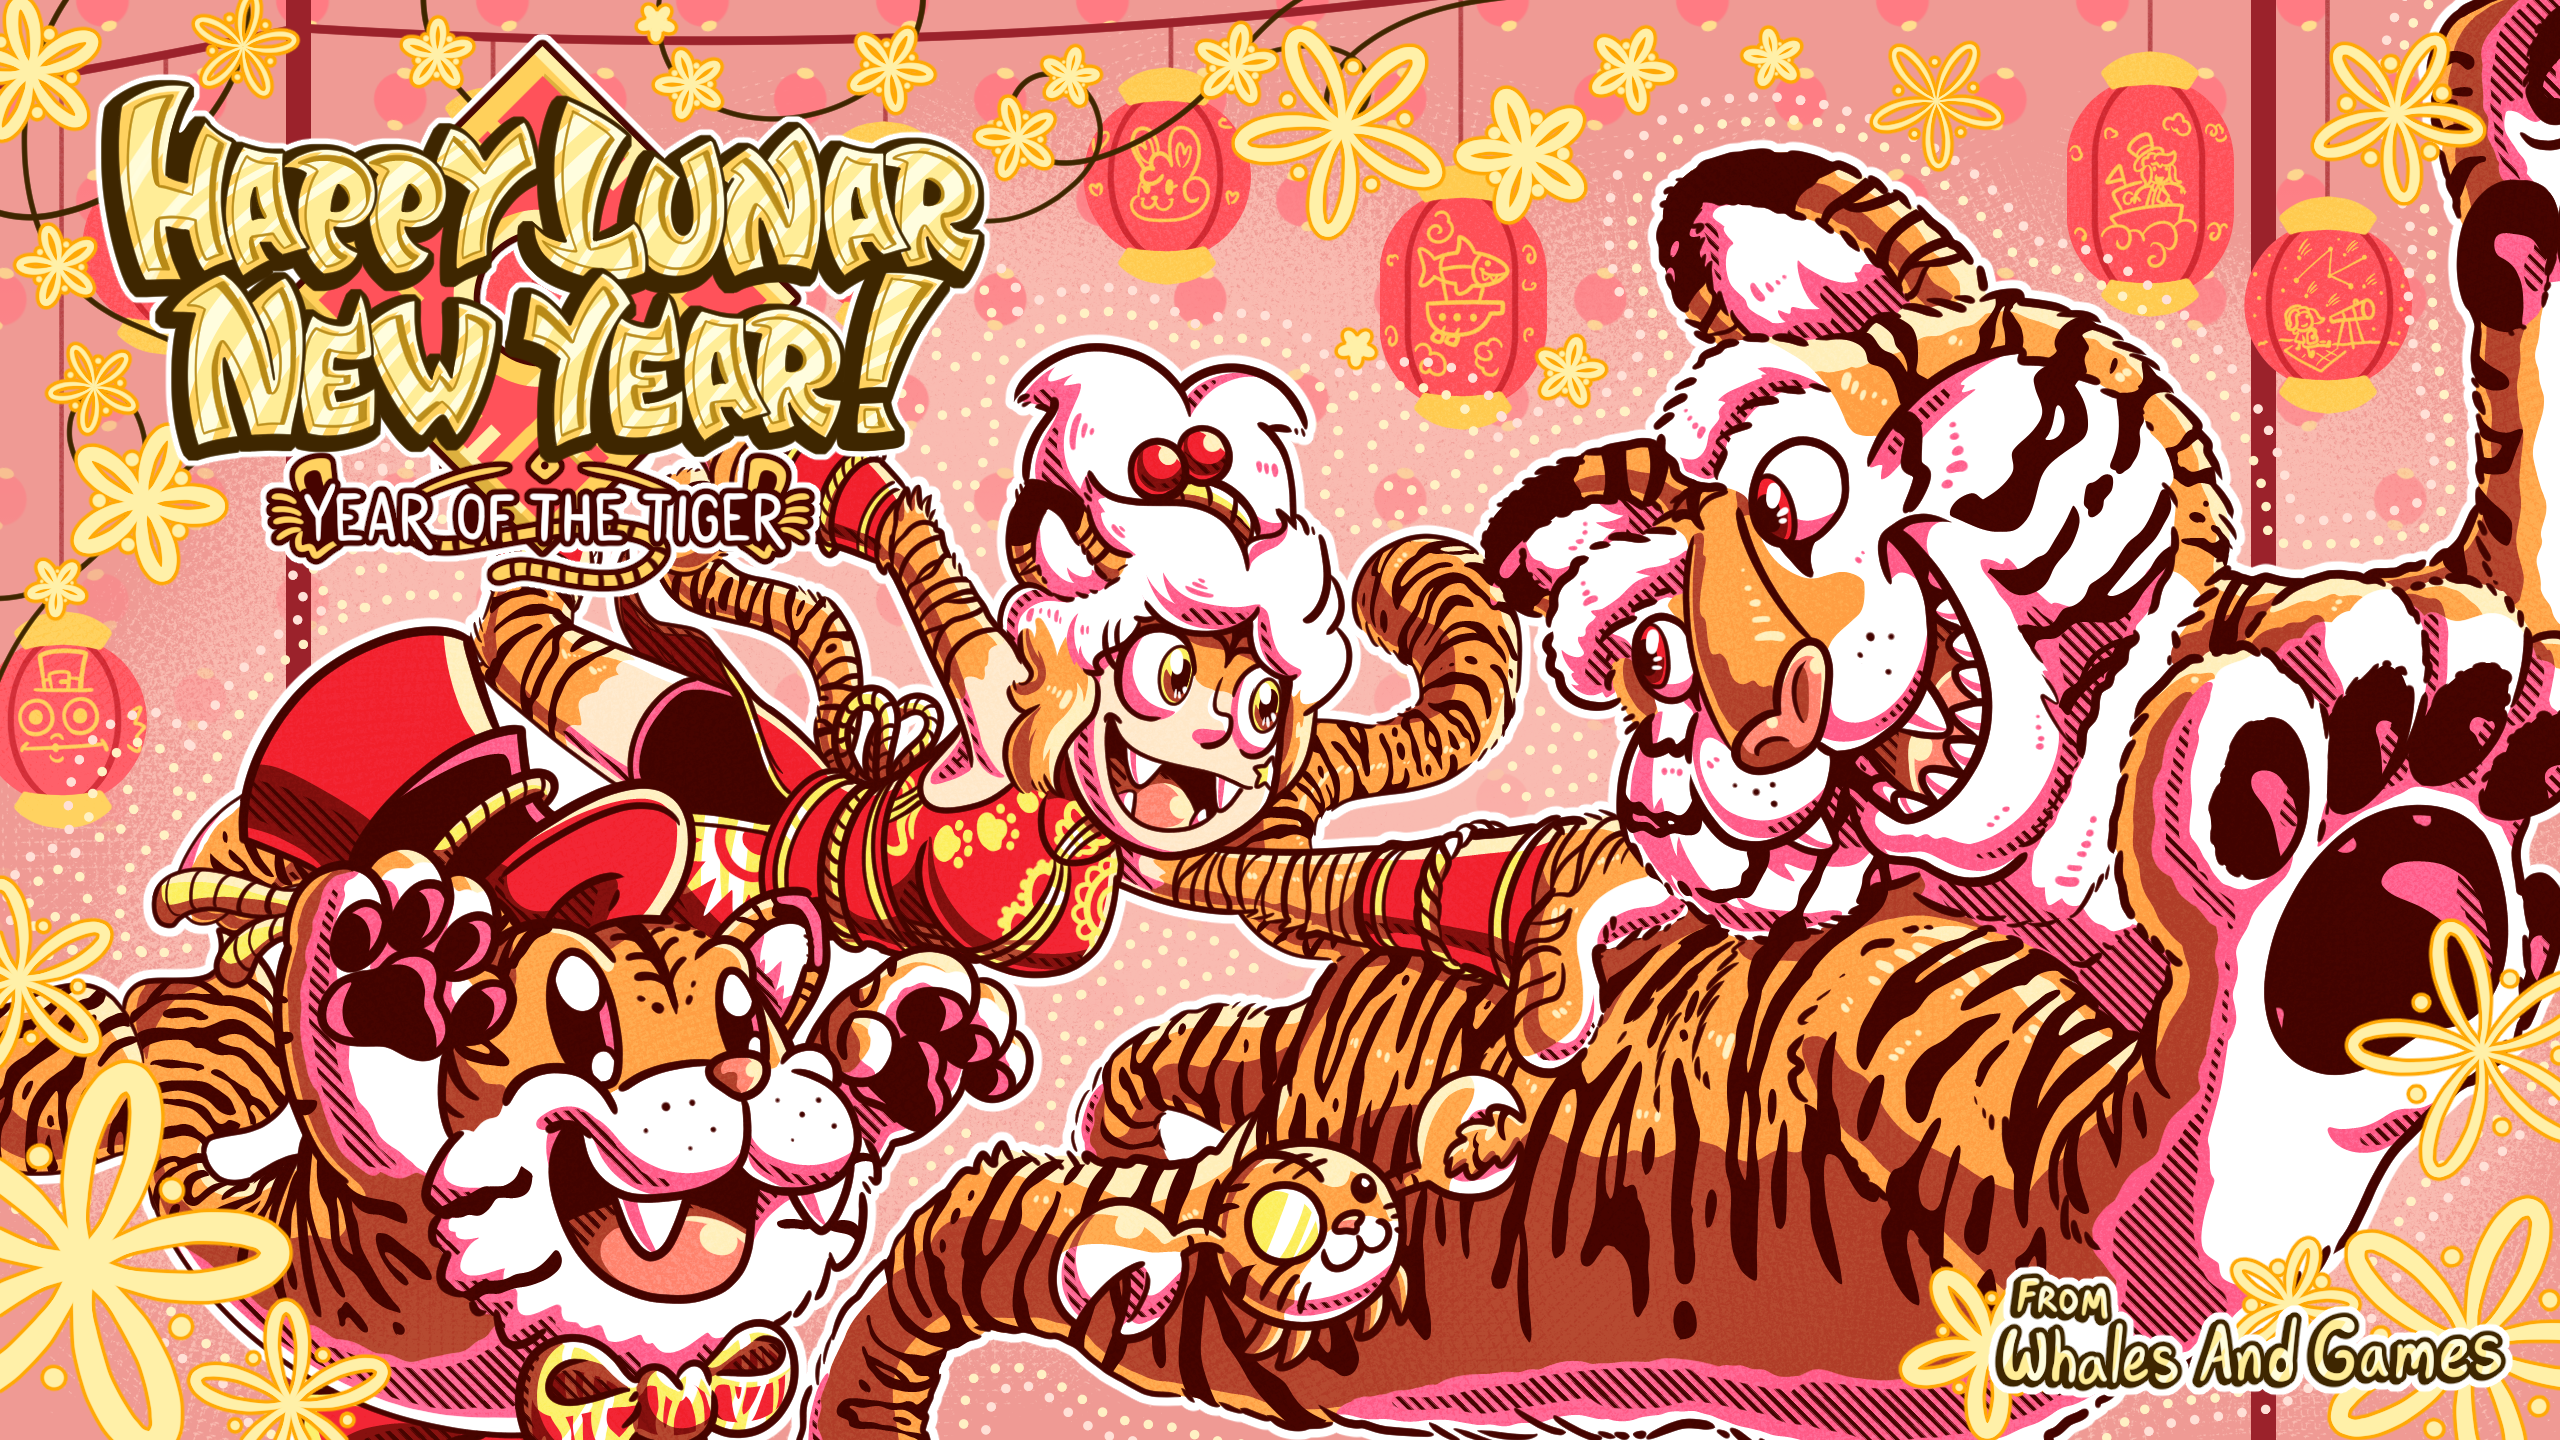 Happy Lunar New Year from Whales And Games!